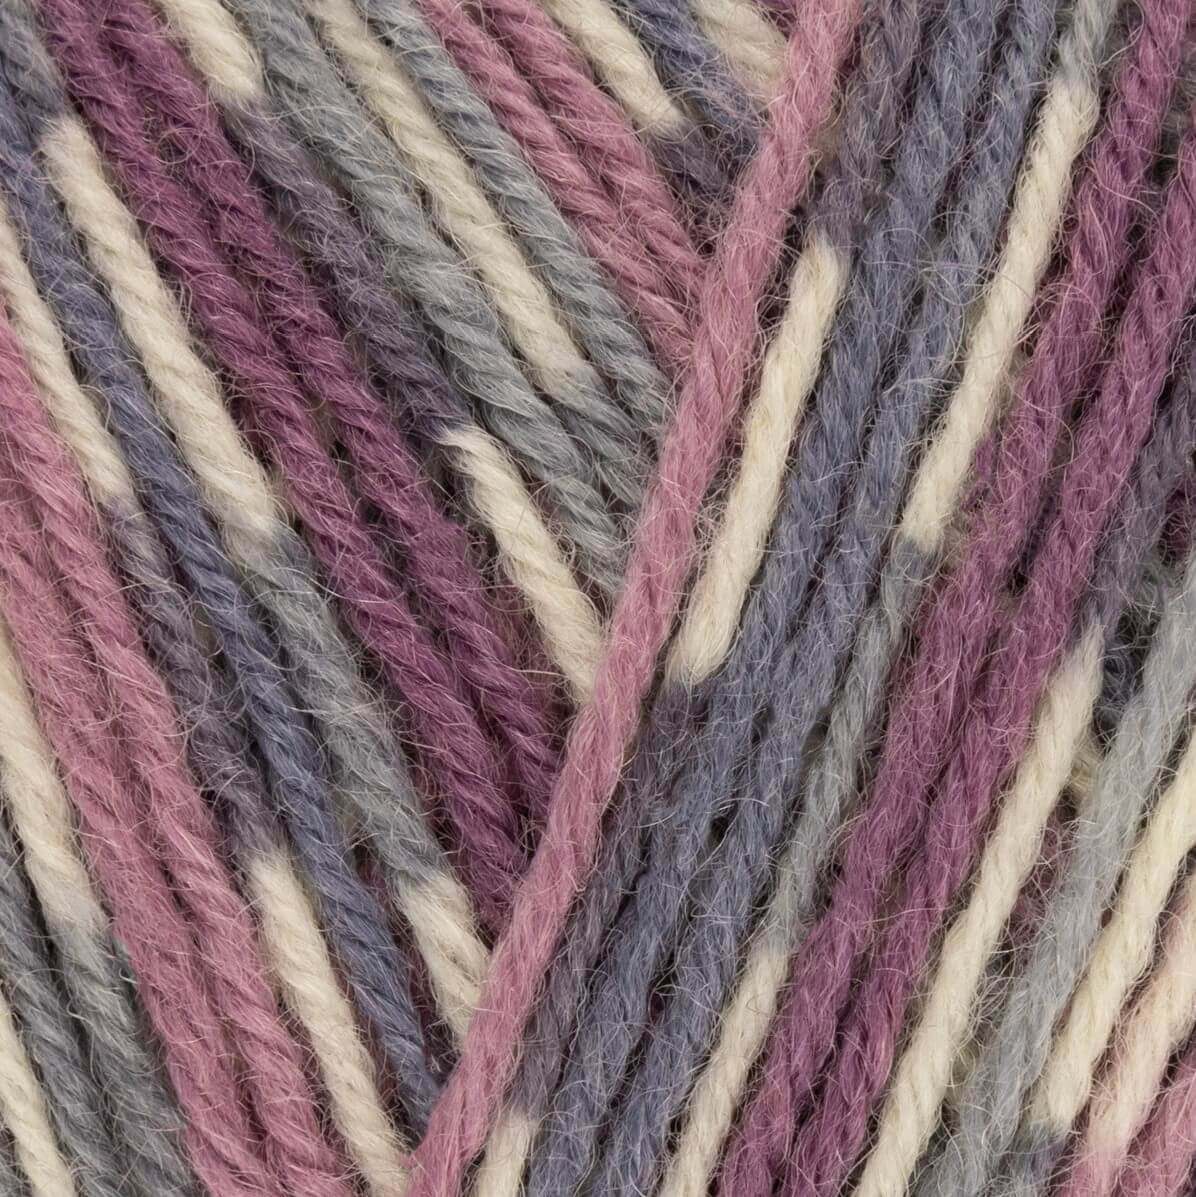 West Yorkshire Spinners Country Birds Range Signature 4ply - Wood Pigeon 864